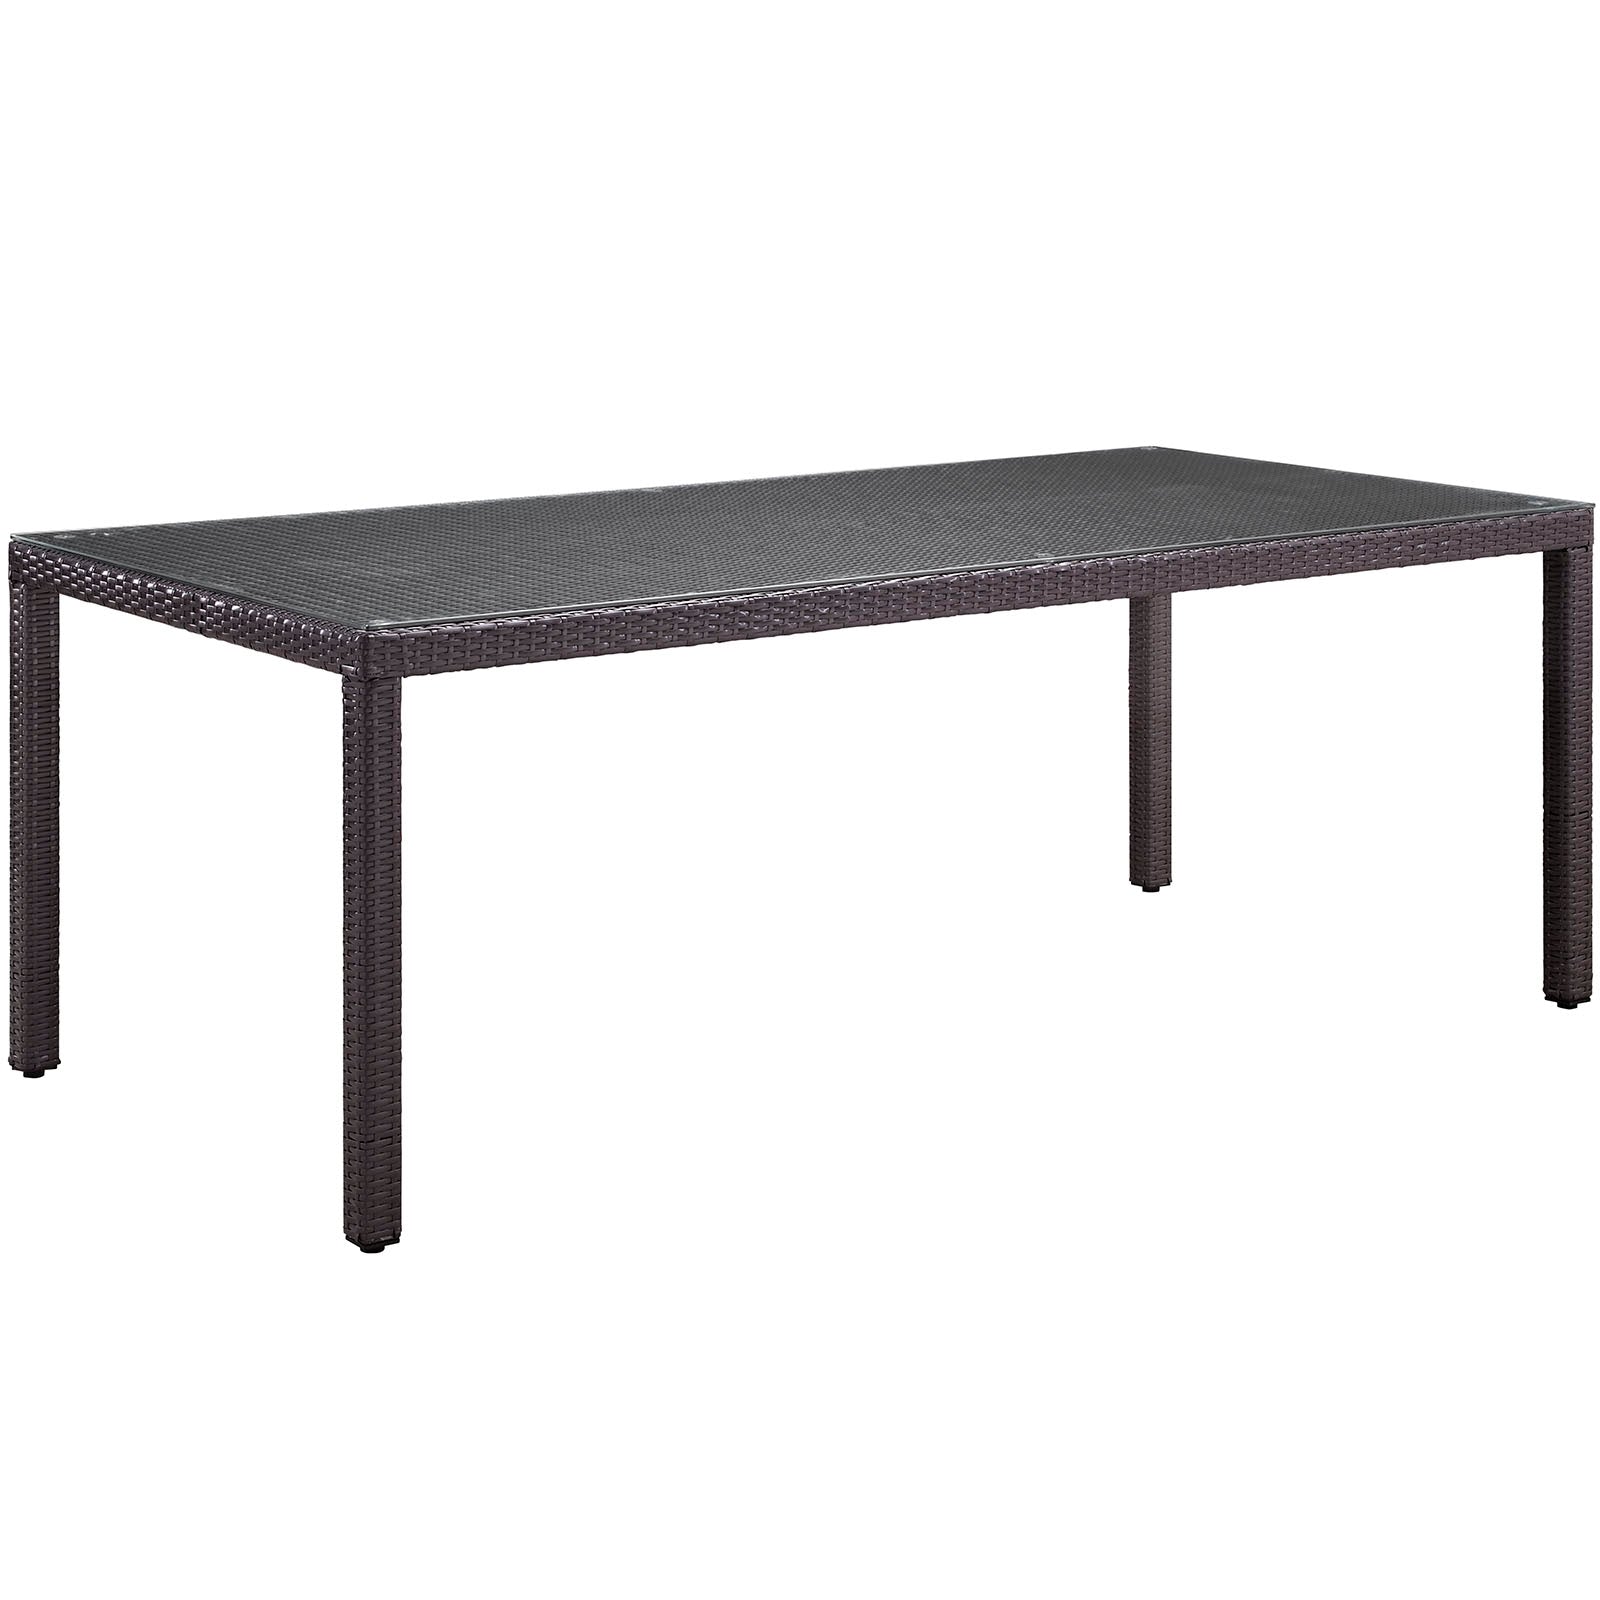 Modway Outdoor Dining Tables - Convene 82" Outdoor Dining Table Espresso